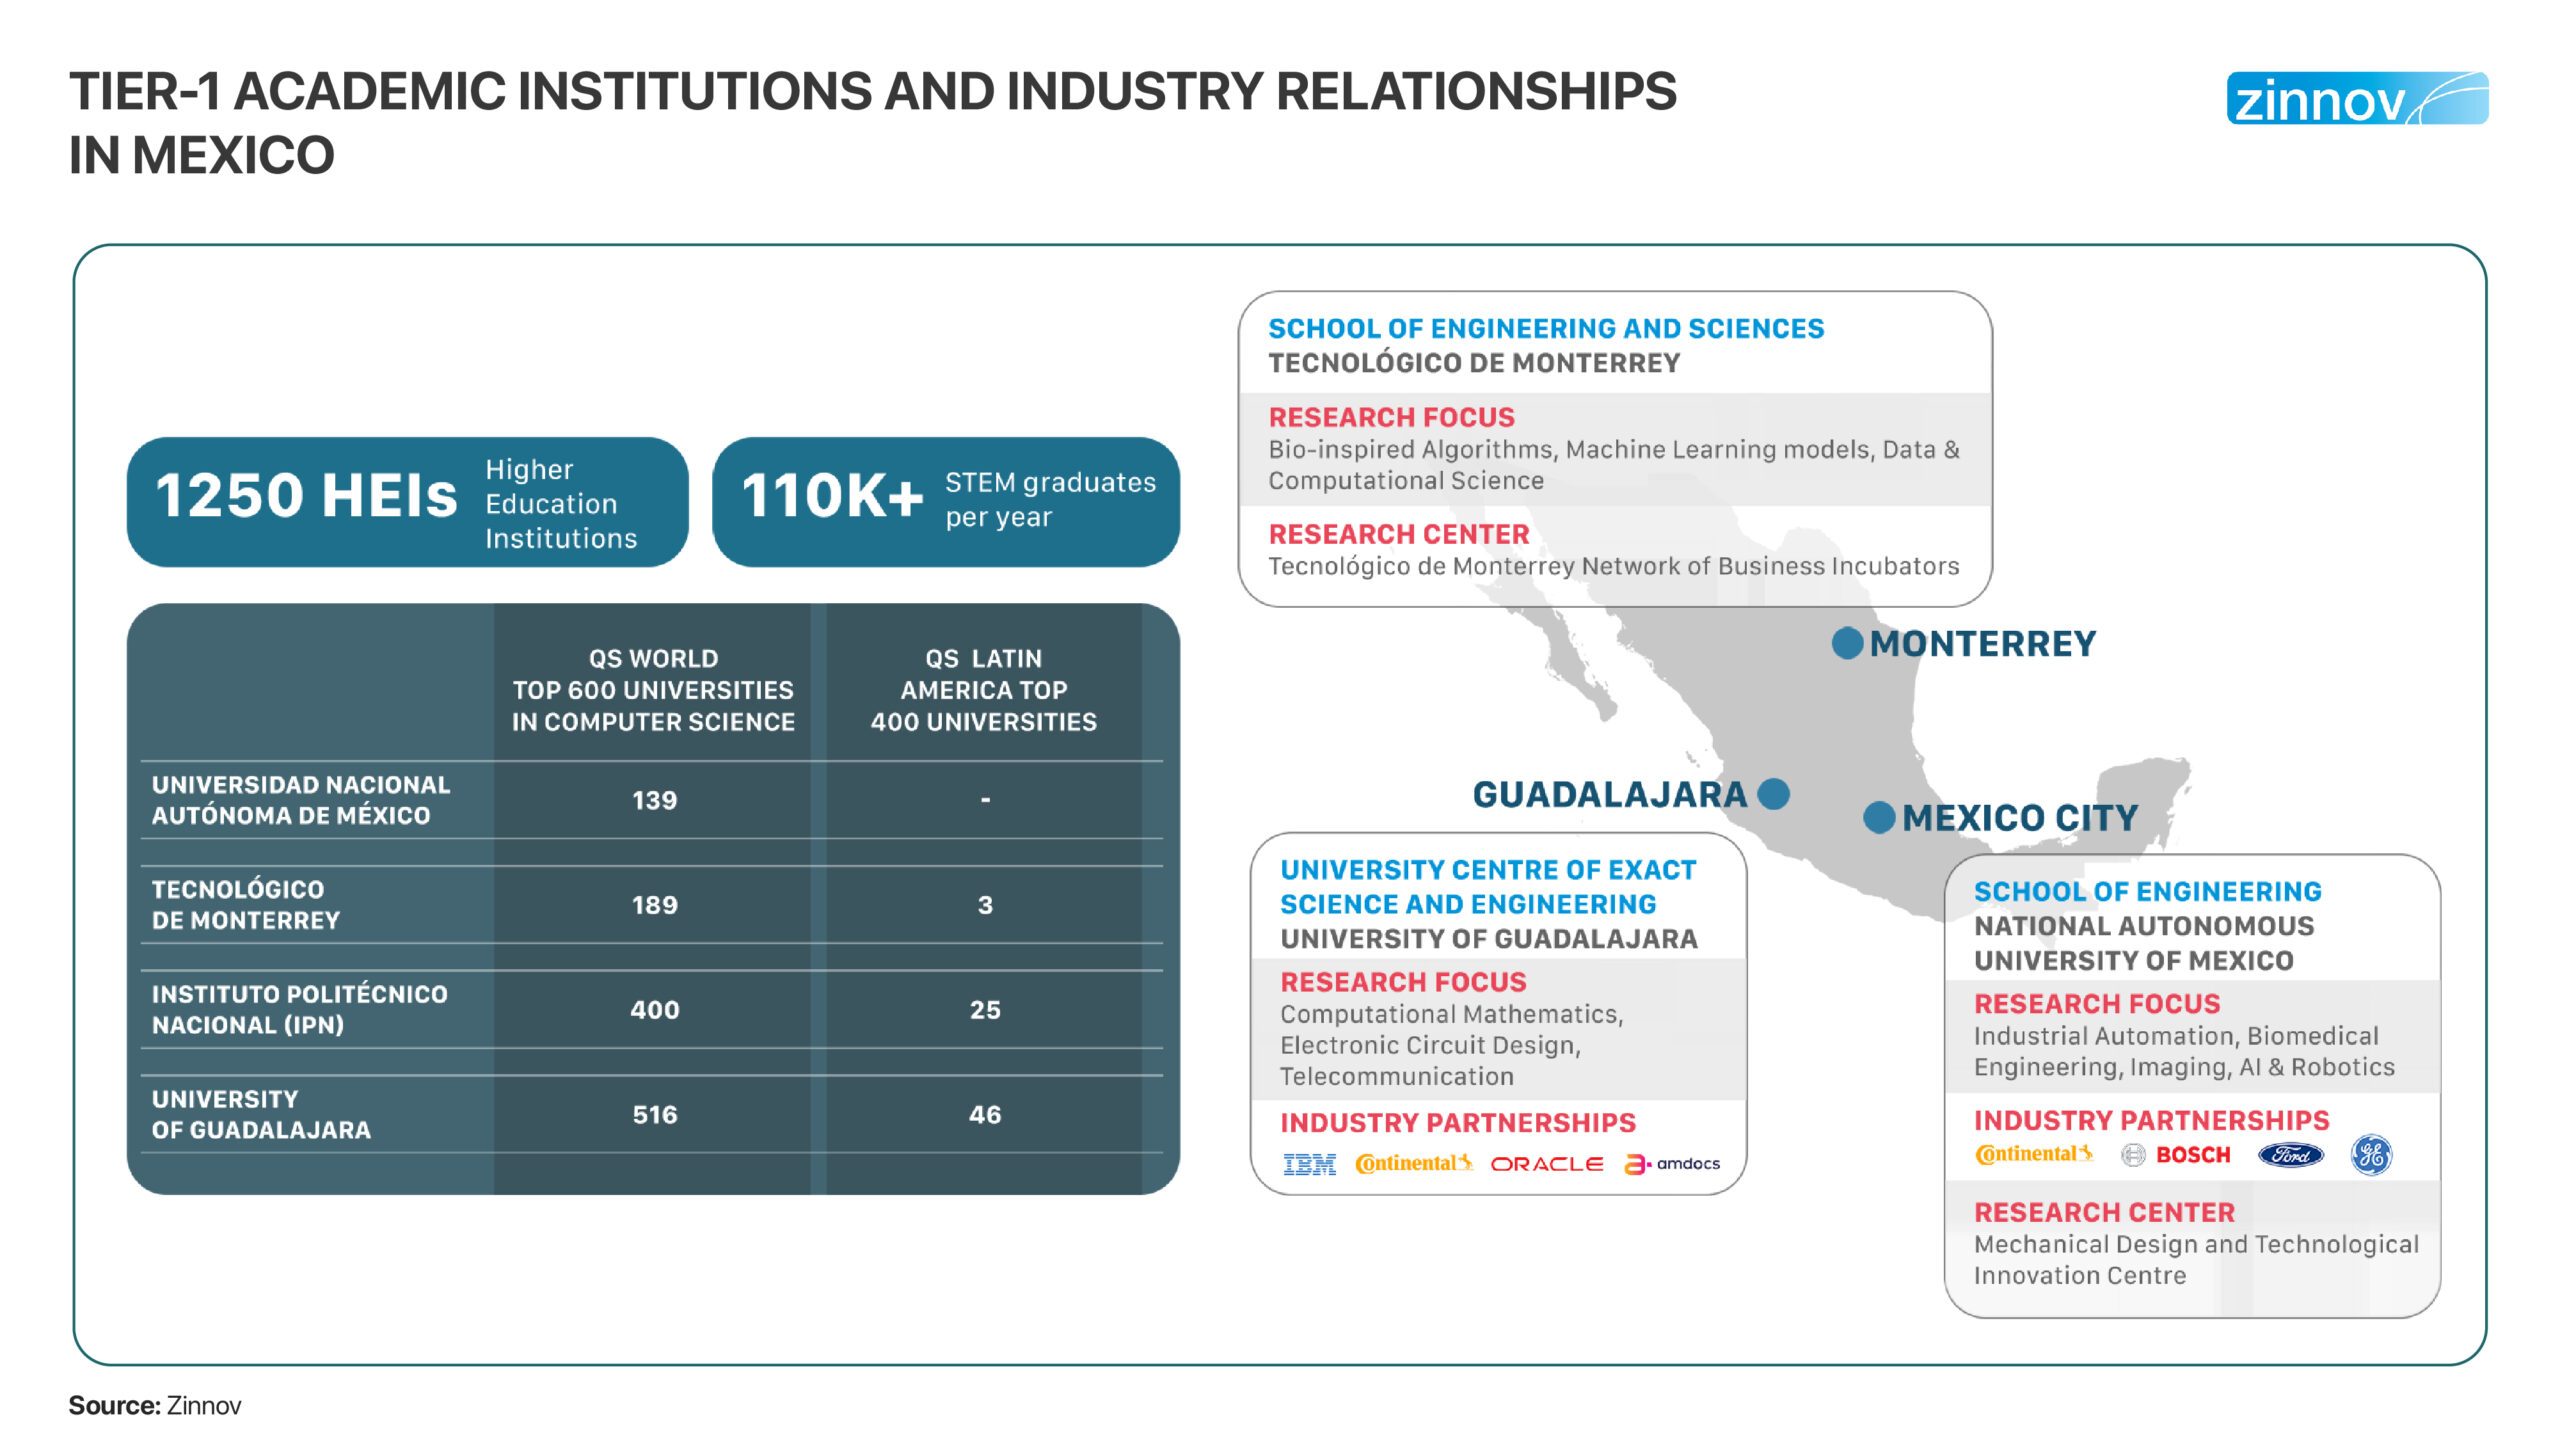 Academic institution and industry relationships in Mexico